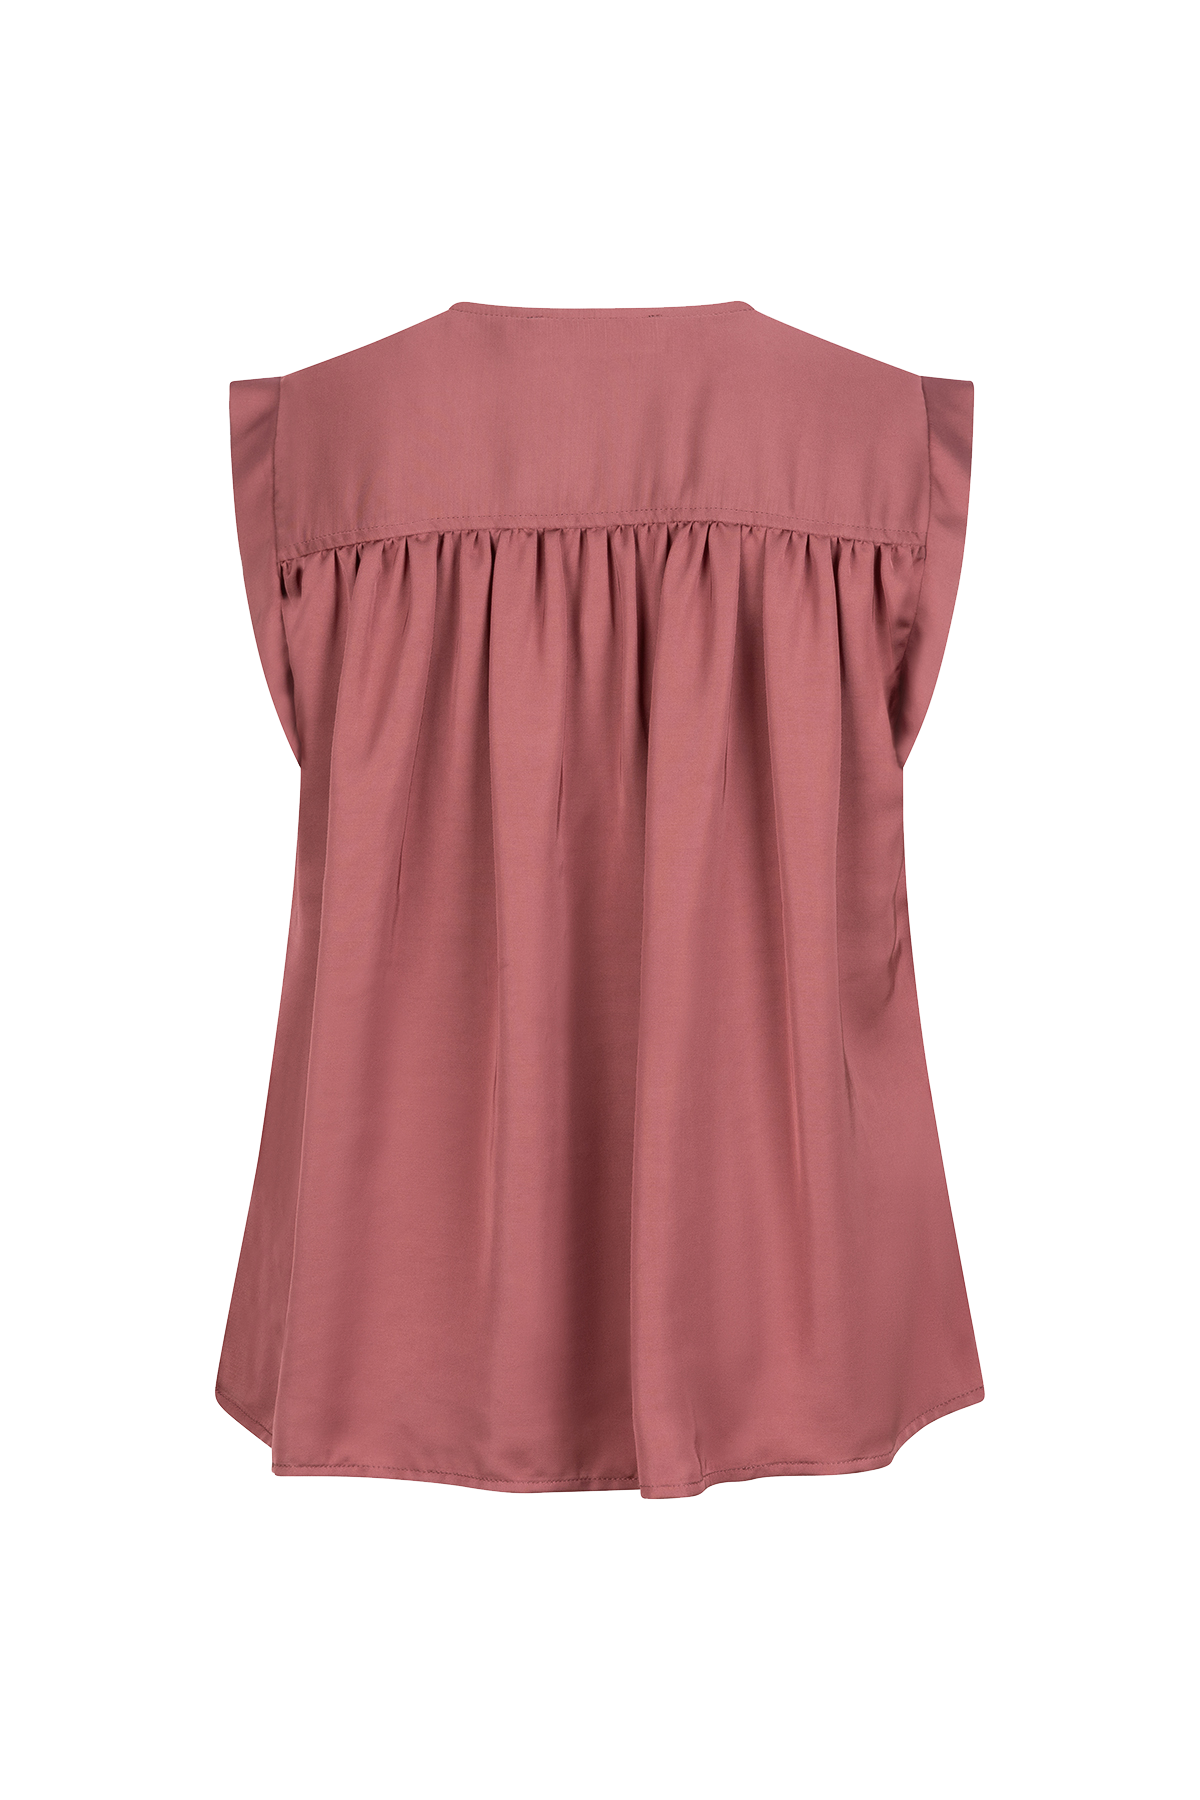 RODEE BLOUSE ROSEWOOD